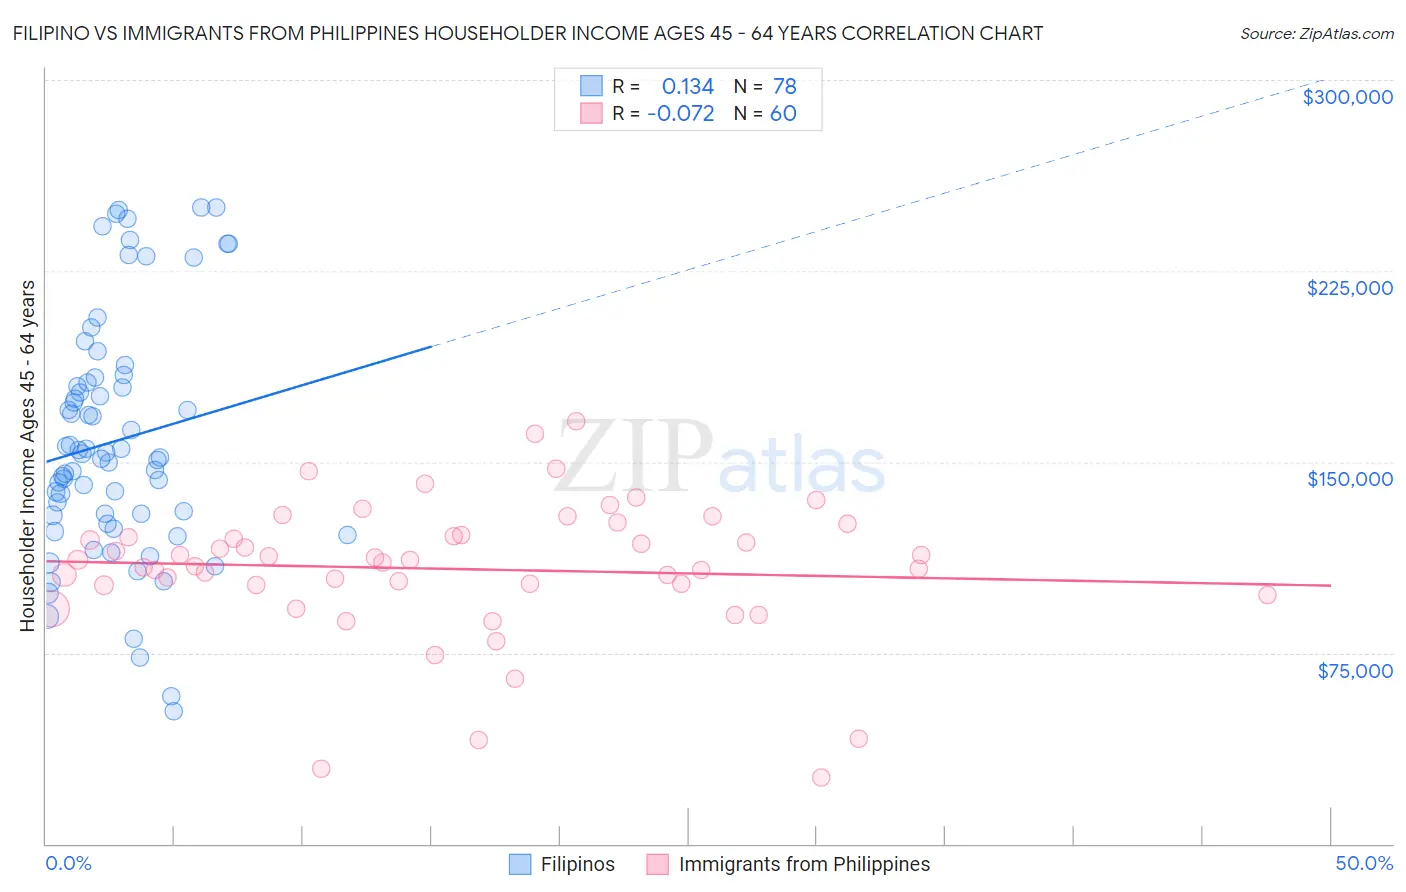 Filipino vs Immigrants from Philippines Householder Income Ages 45 - 64 years